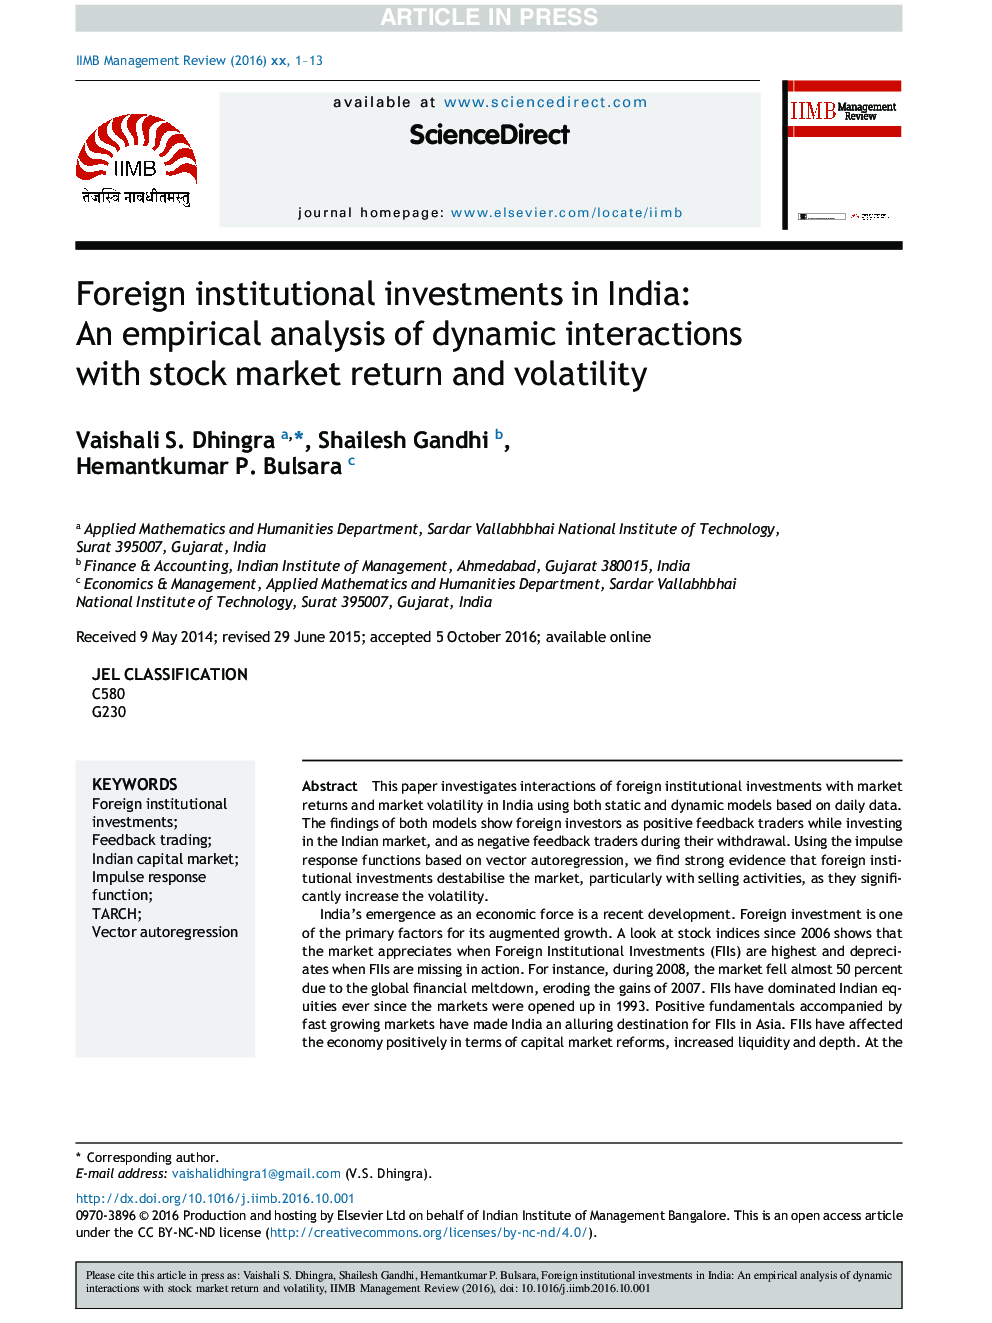 Foreign institutional investments in India: An empirical analysis of dynamic interactions with stock market return and volatility